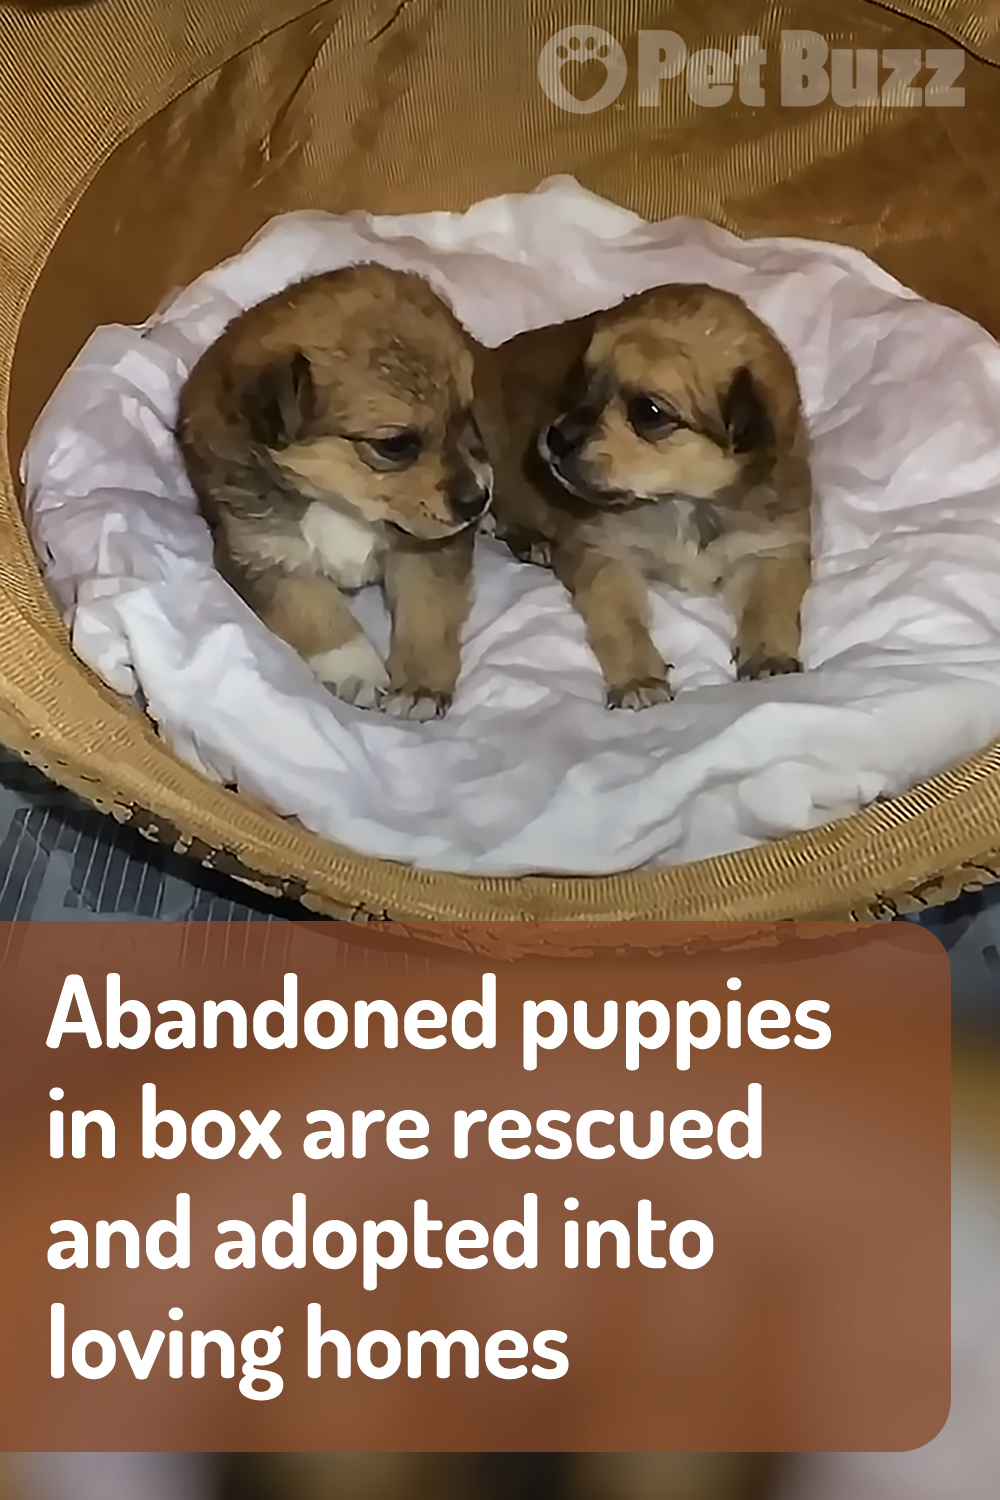 Abandoned puppies in box are rescued and adopted into loving homes